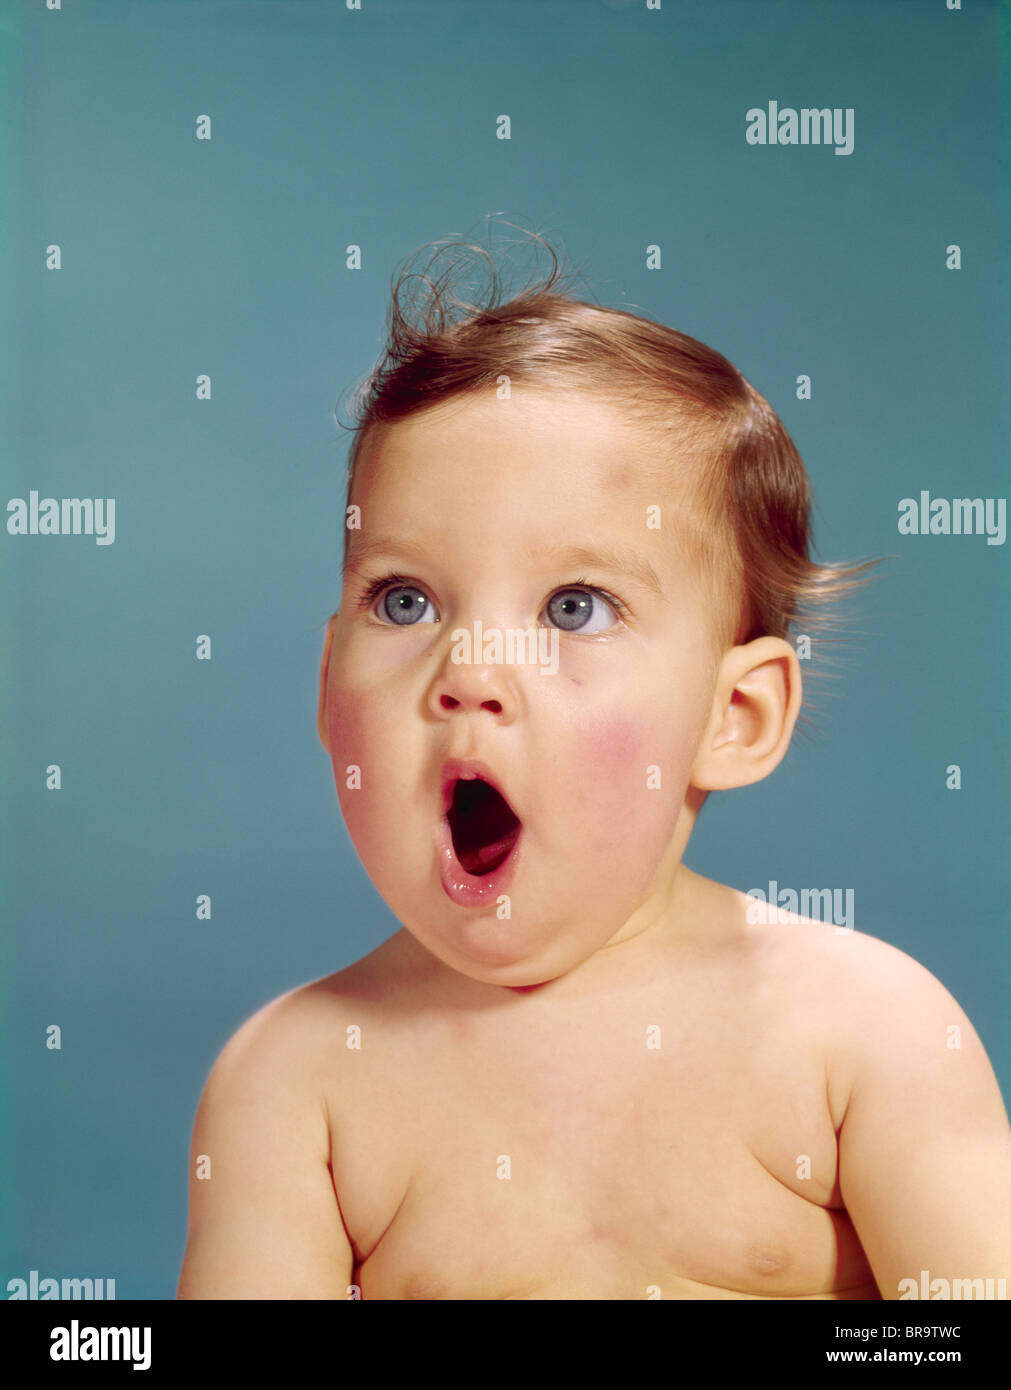 1960s BABY PORTRAIT MOUTH WIDE OPEN SHOCKED FACIAL EXPRESSION Stock Photo